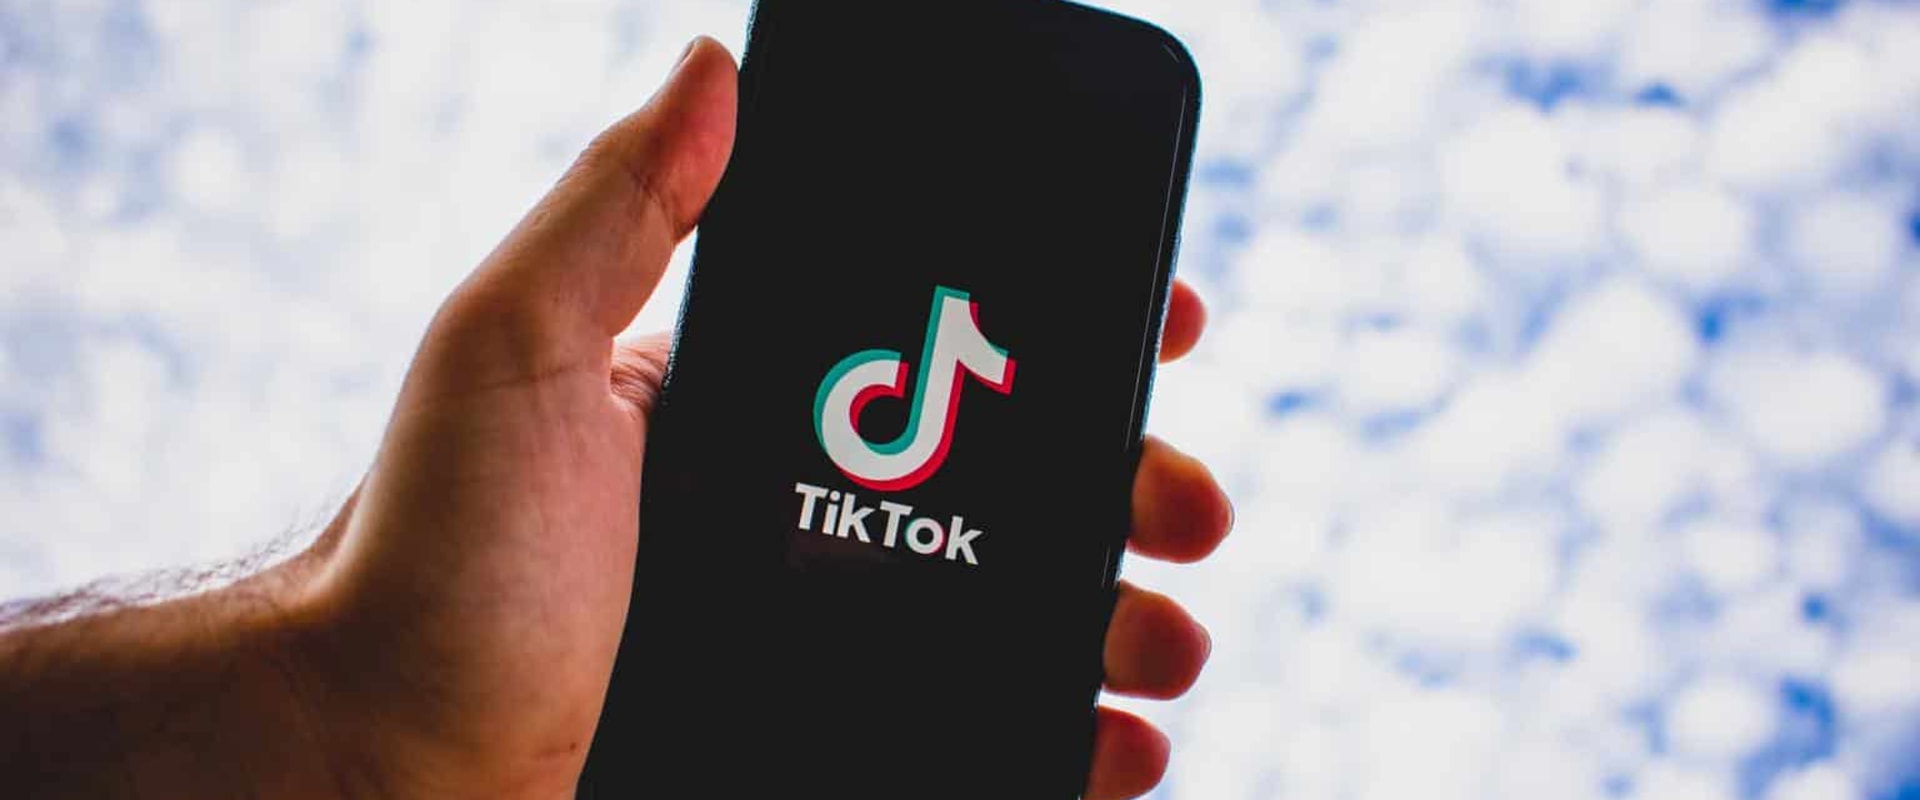 What are the best practices for creating effective tiktok ads?